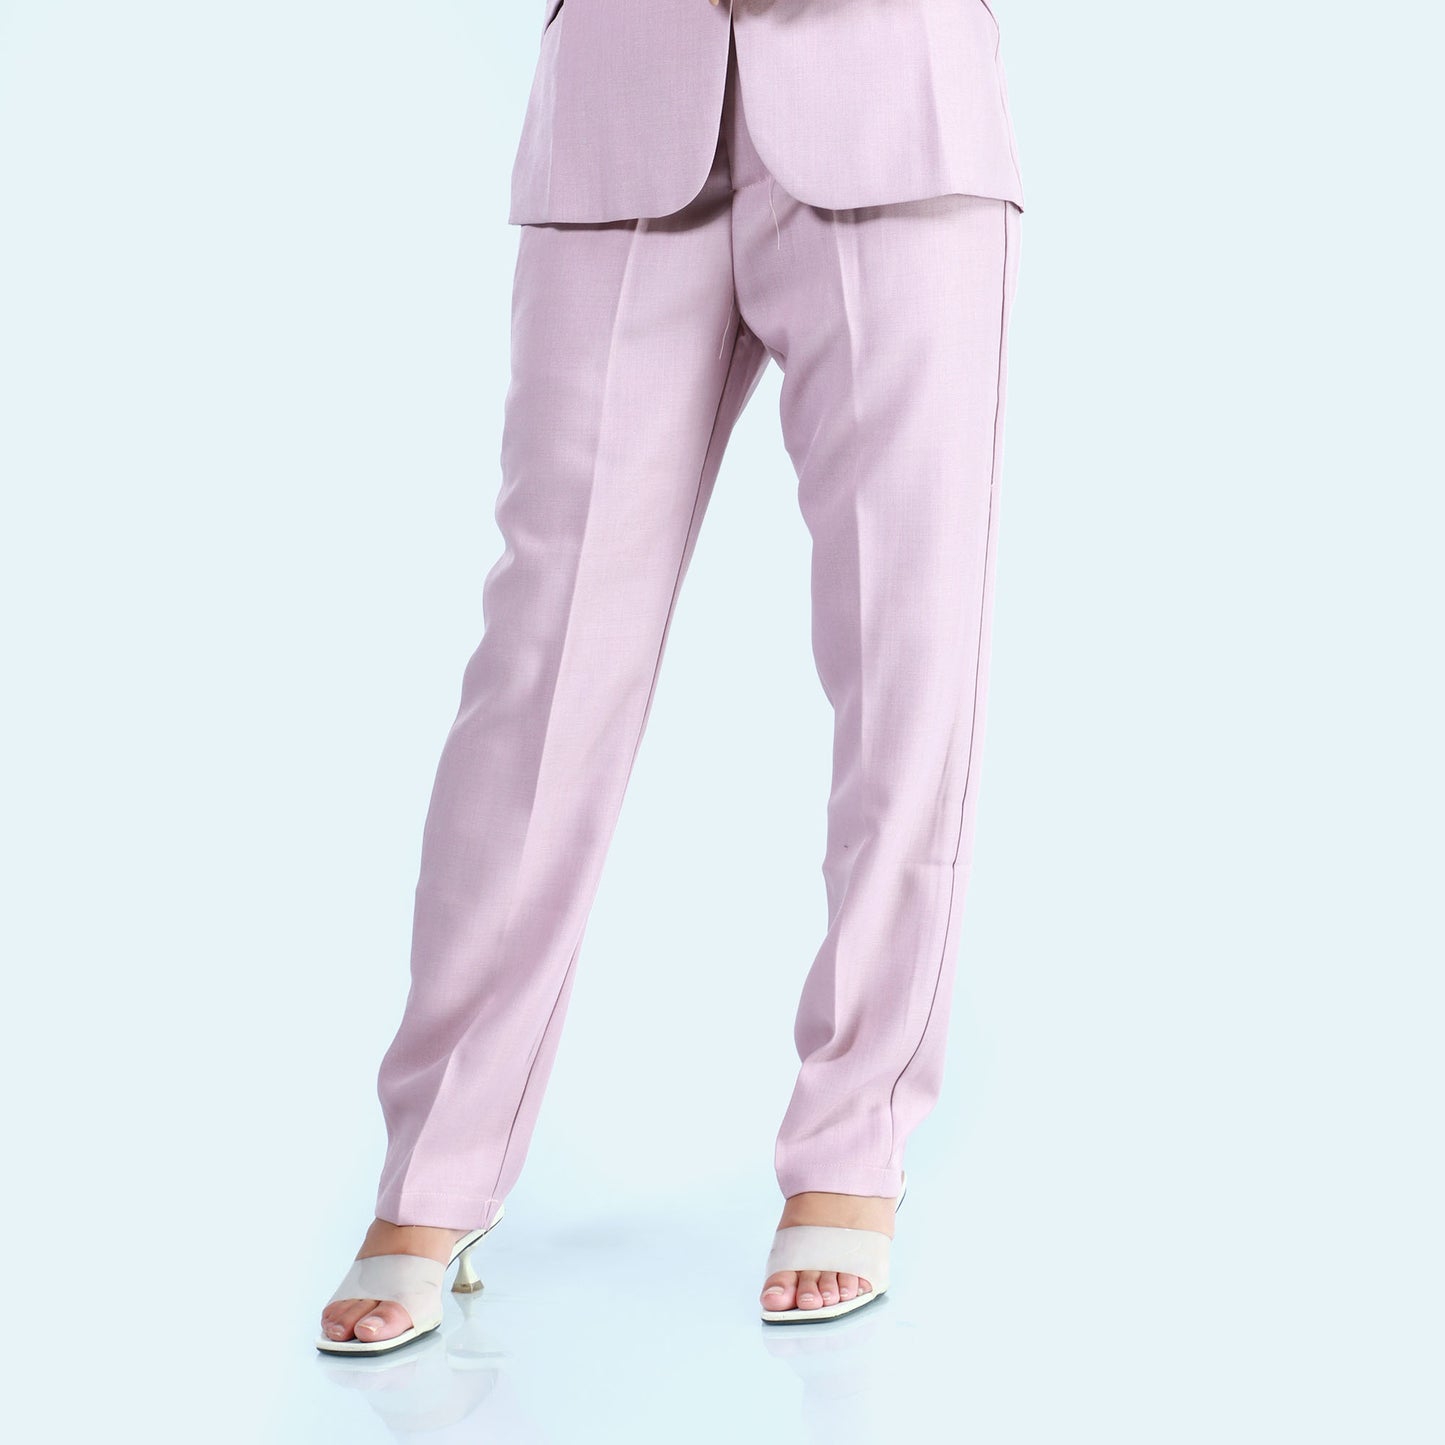 Pink Single Button Formal Coat And Pant Set For Women